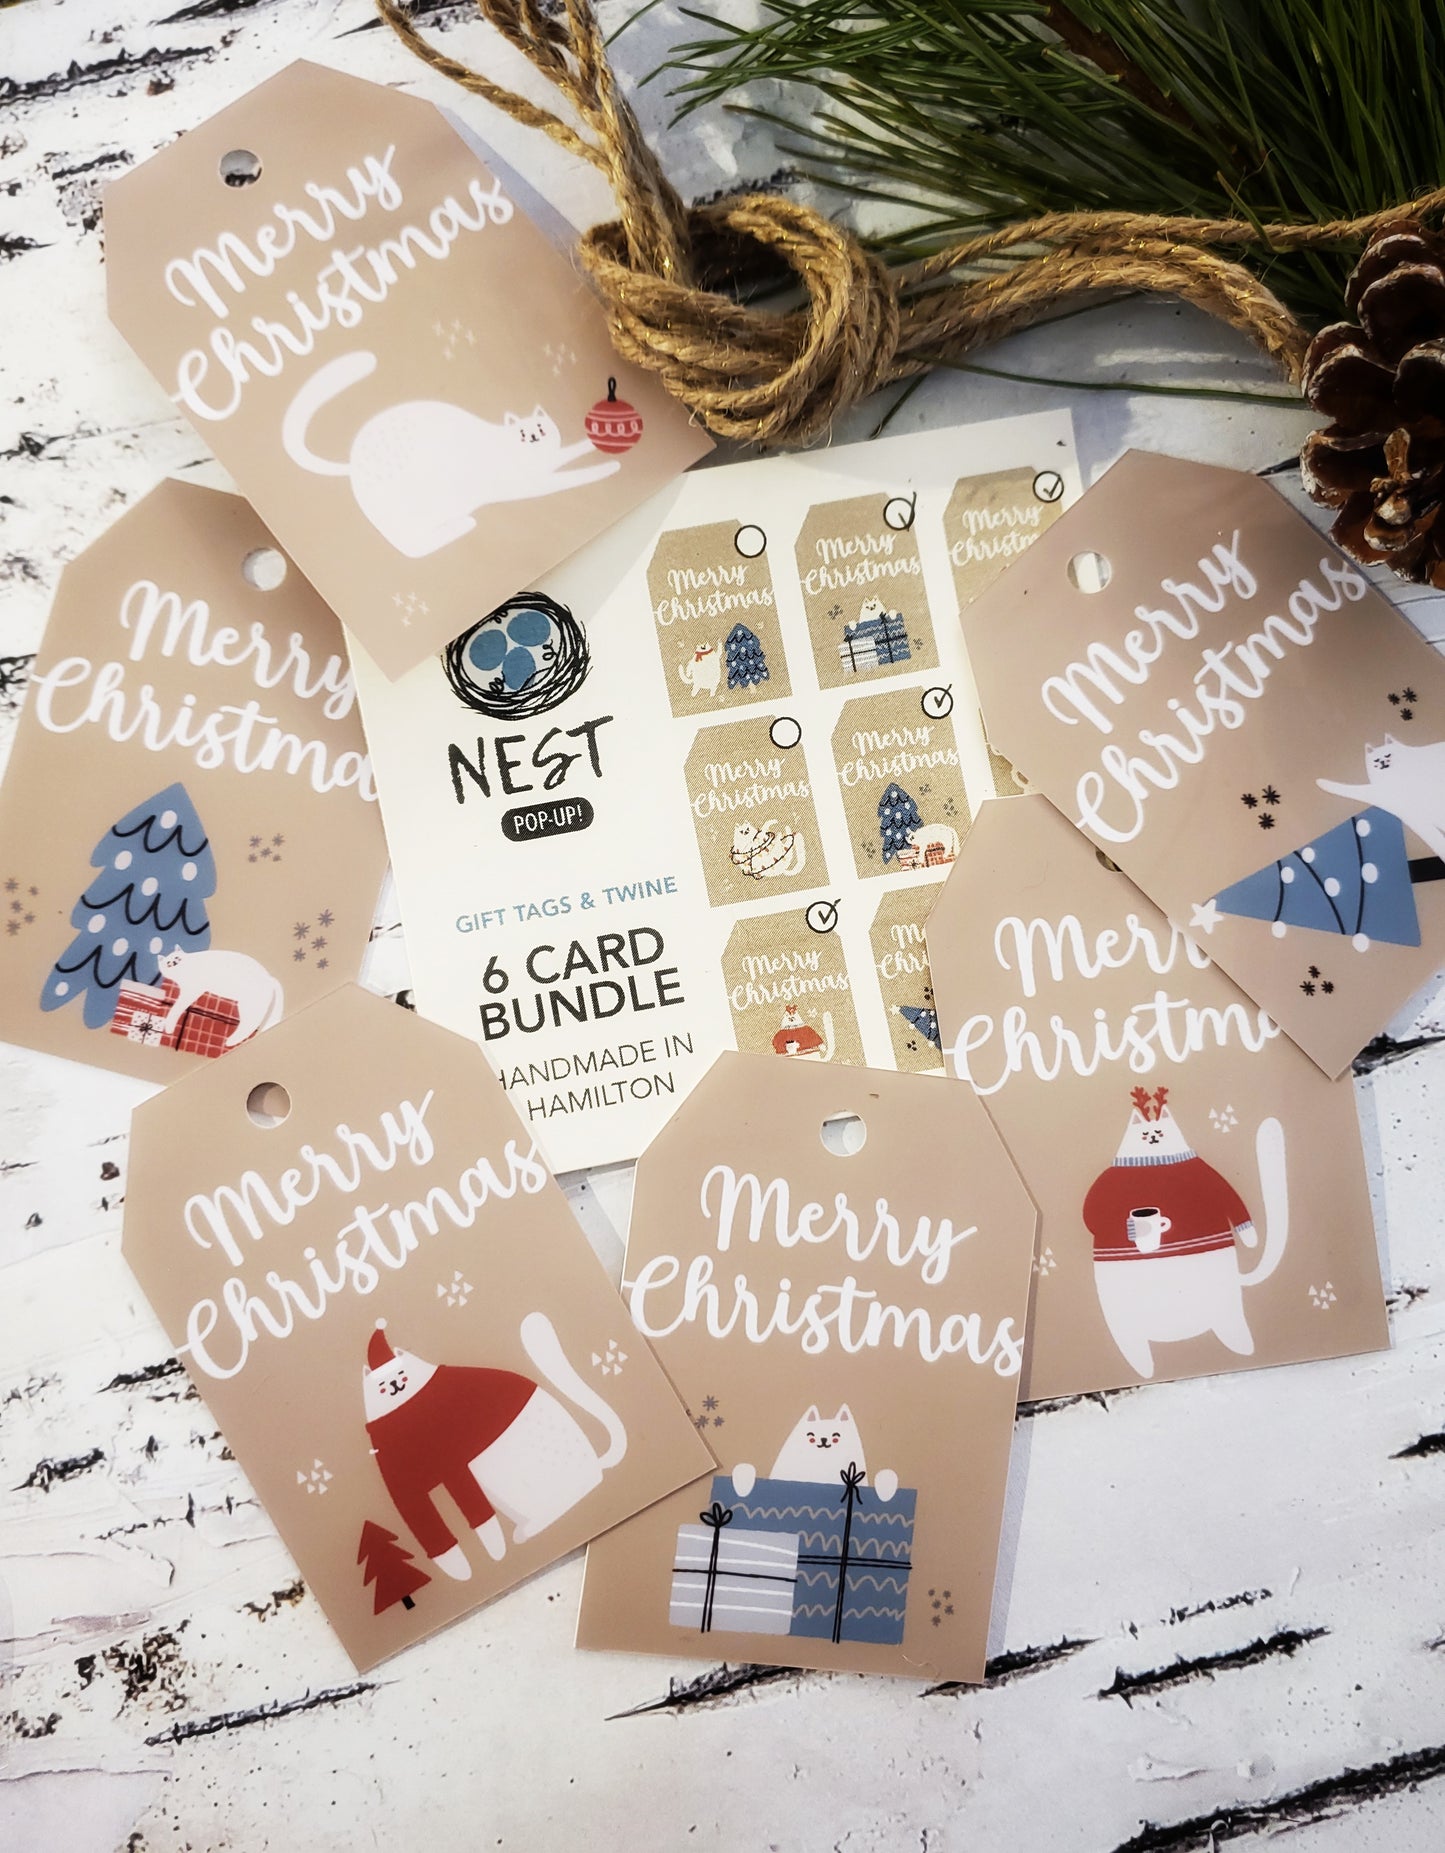 Nest Pop-Up! Christmas Gift Tags - Cats